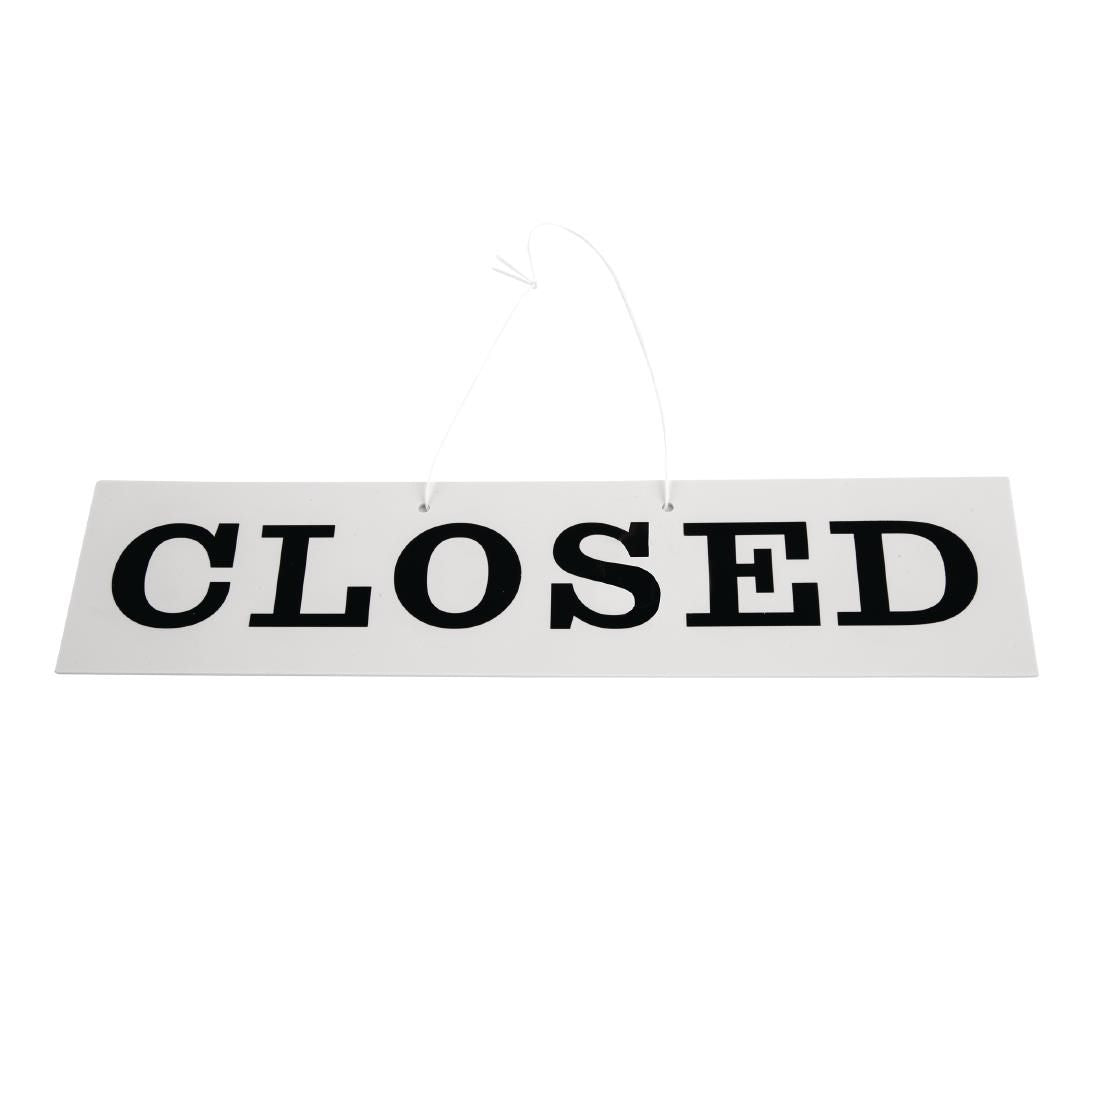 Reversible Hanging Open And Closed Sign